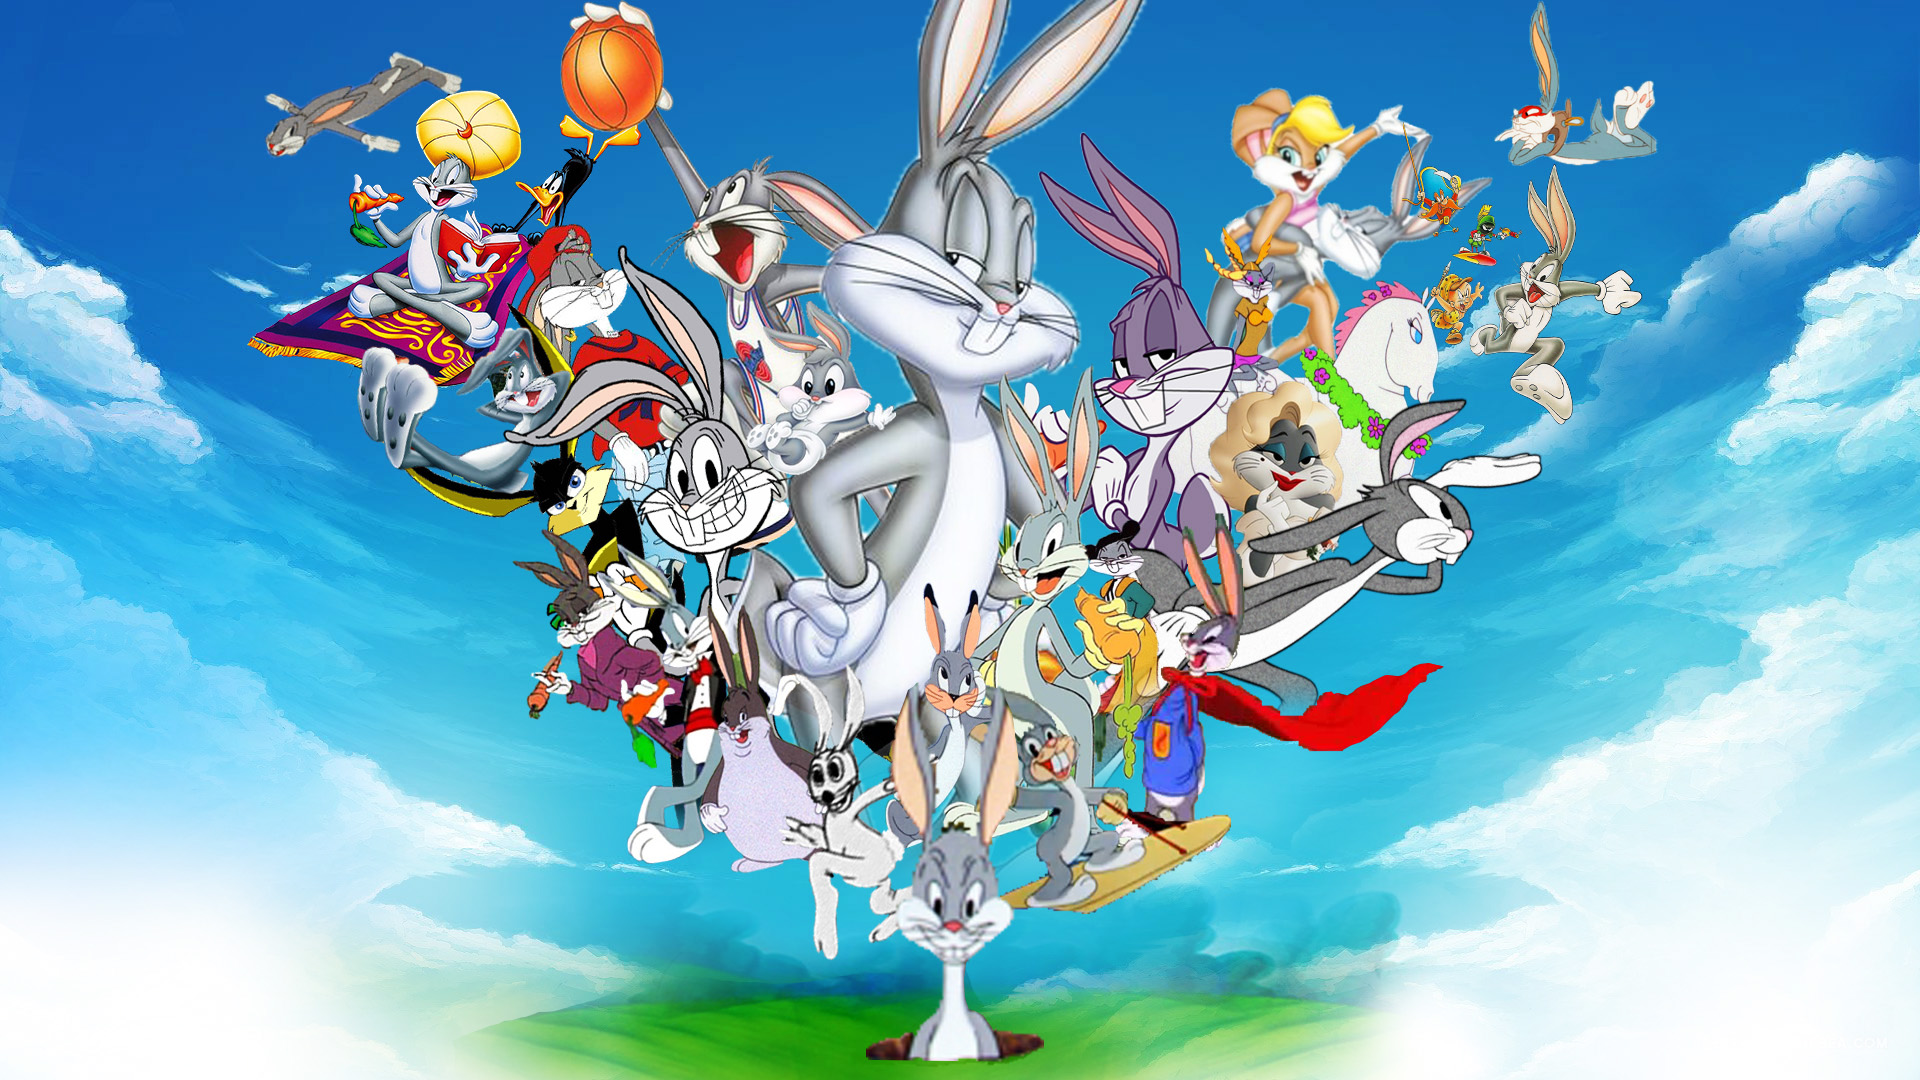 new looney tunes, looney tunes: back in action, tv show, basketball, bugs bunny, daffy duck, elmer fudd, lola bunny, loonatics unleashed, marvin the martian, space jam, the bugs bunny road runner movie, the looney tunes show, who framed roger rabbit, yosemite sam, looney tunes